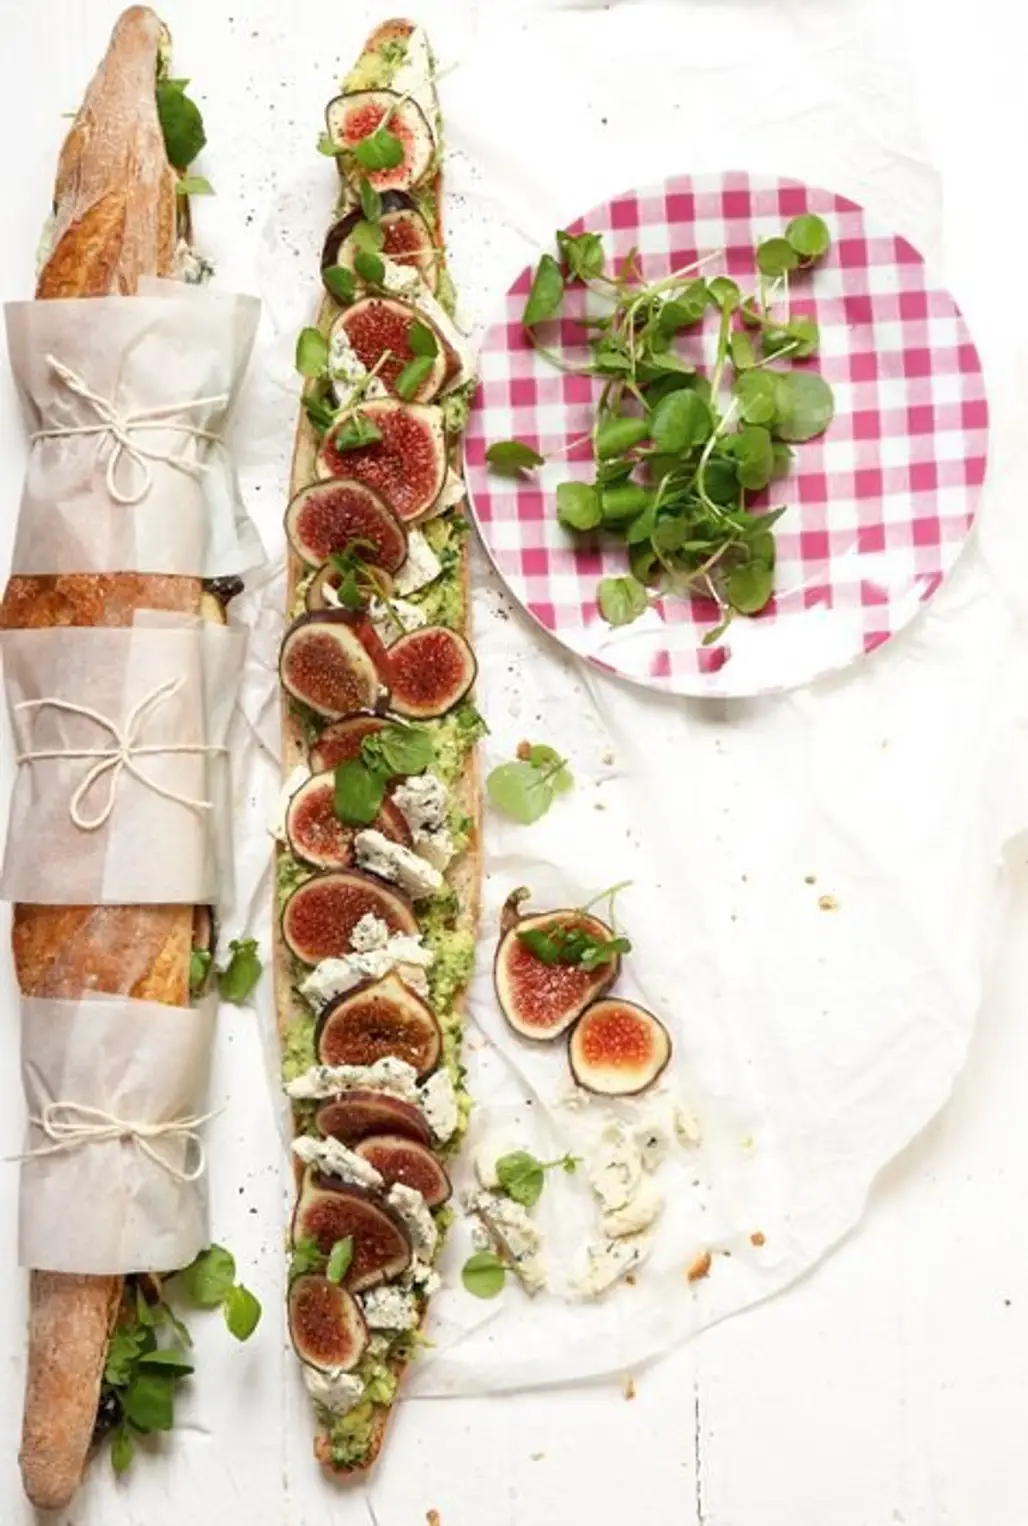 Picnic Baguette with Avocado, Gorgonzola, Fig and Fresh Herbs